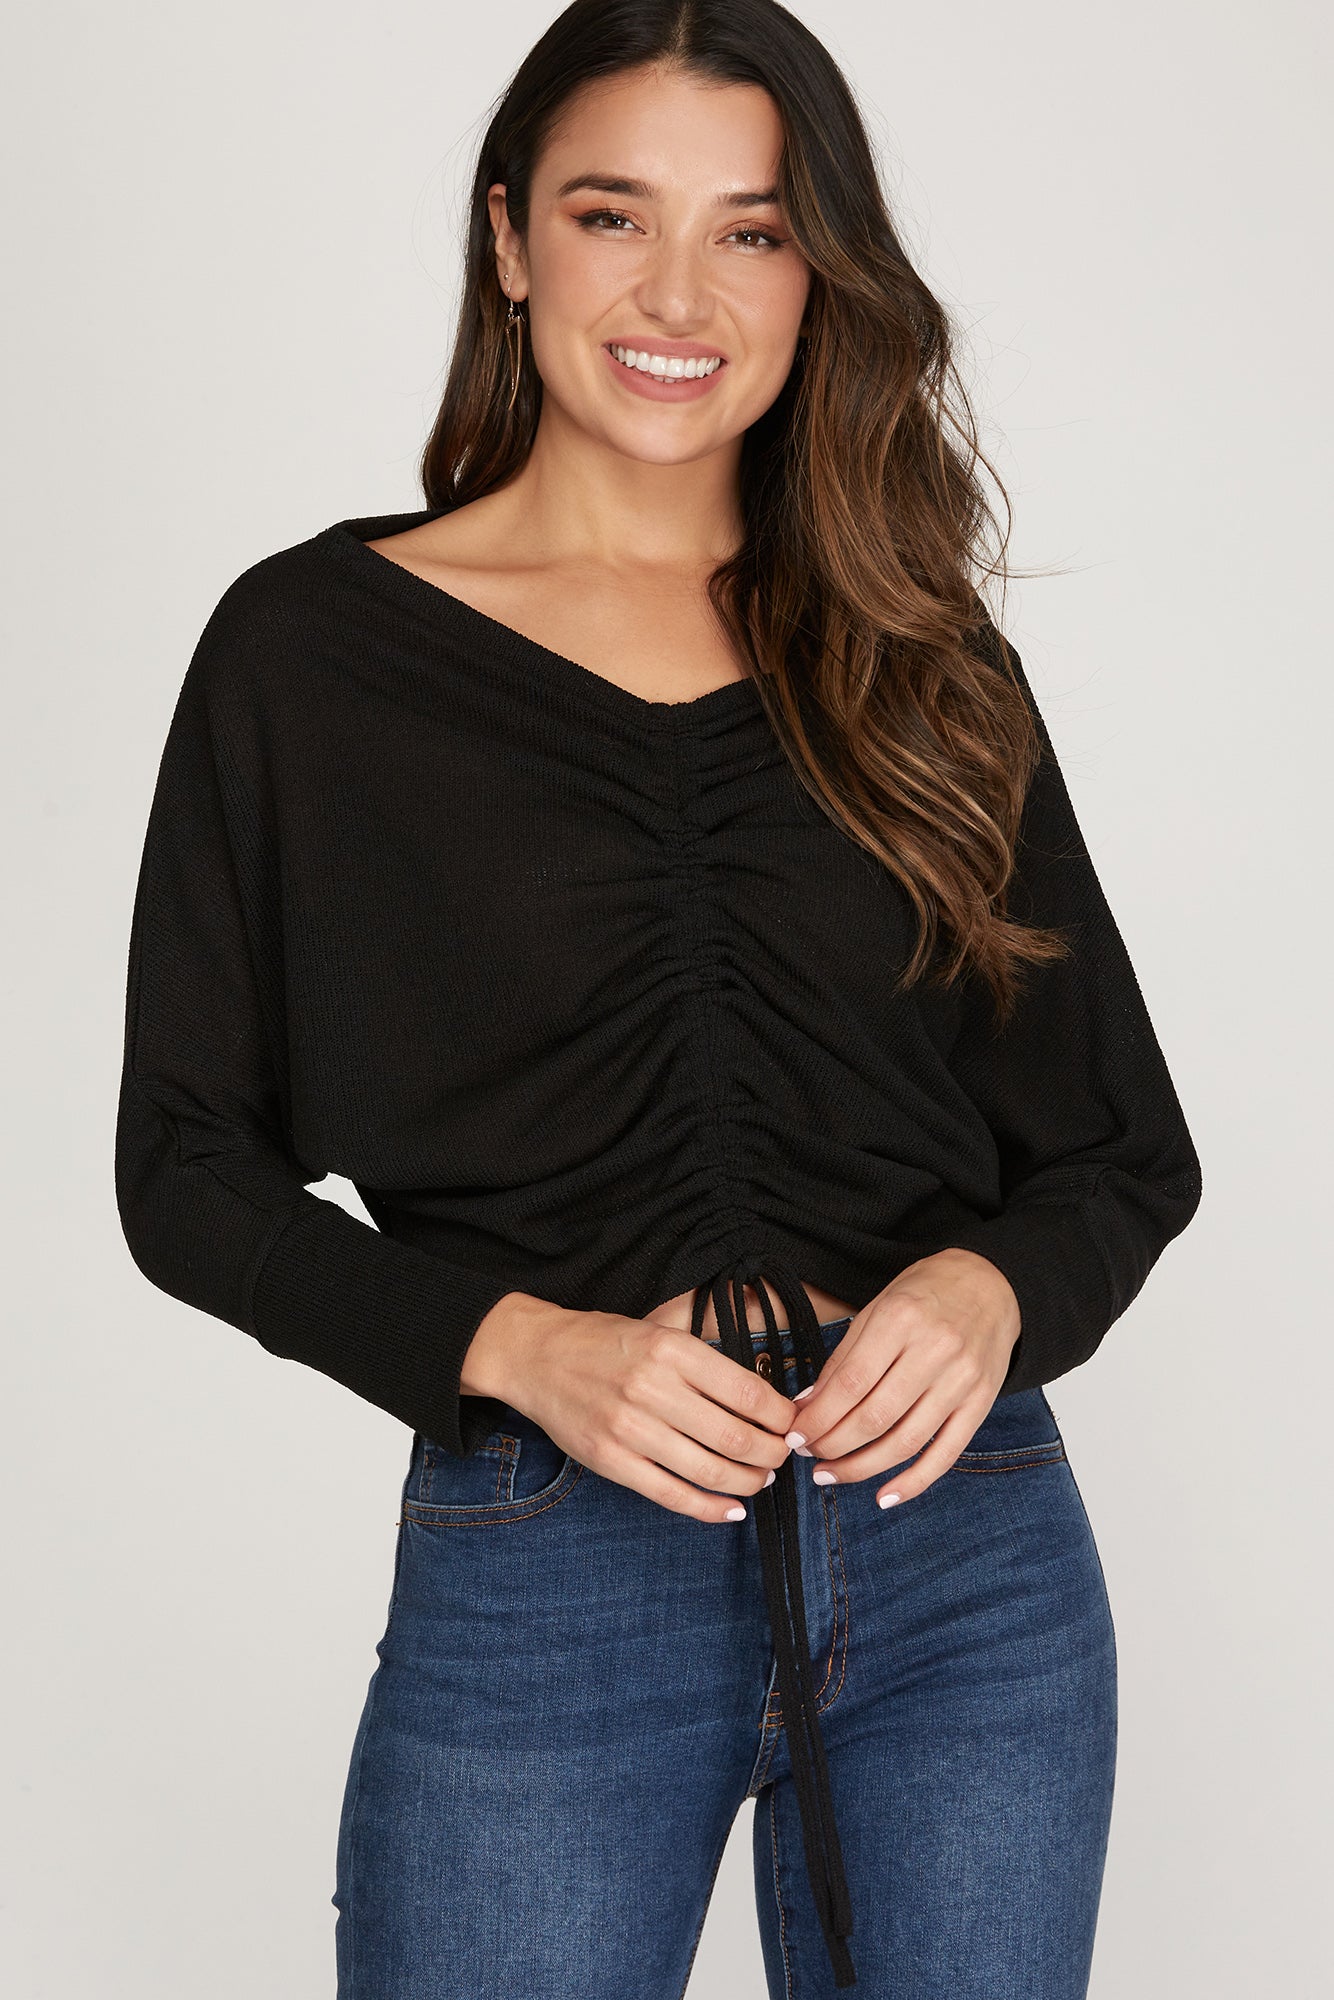 Ruched Center, Knit Top - Black-Shirts & Tops- Hometown Style HTS, women's in store and online boutique located in Ingersoll, Ontario